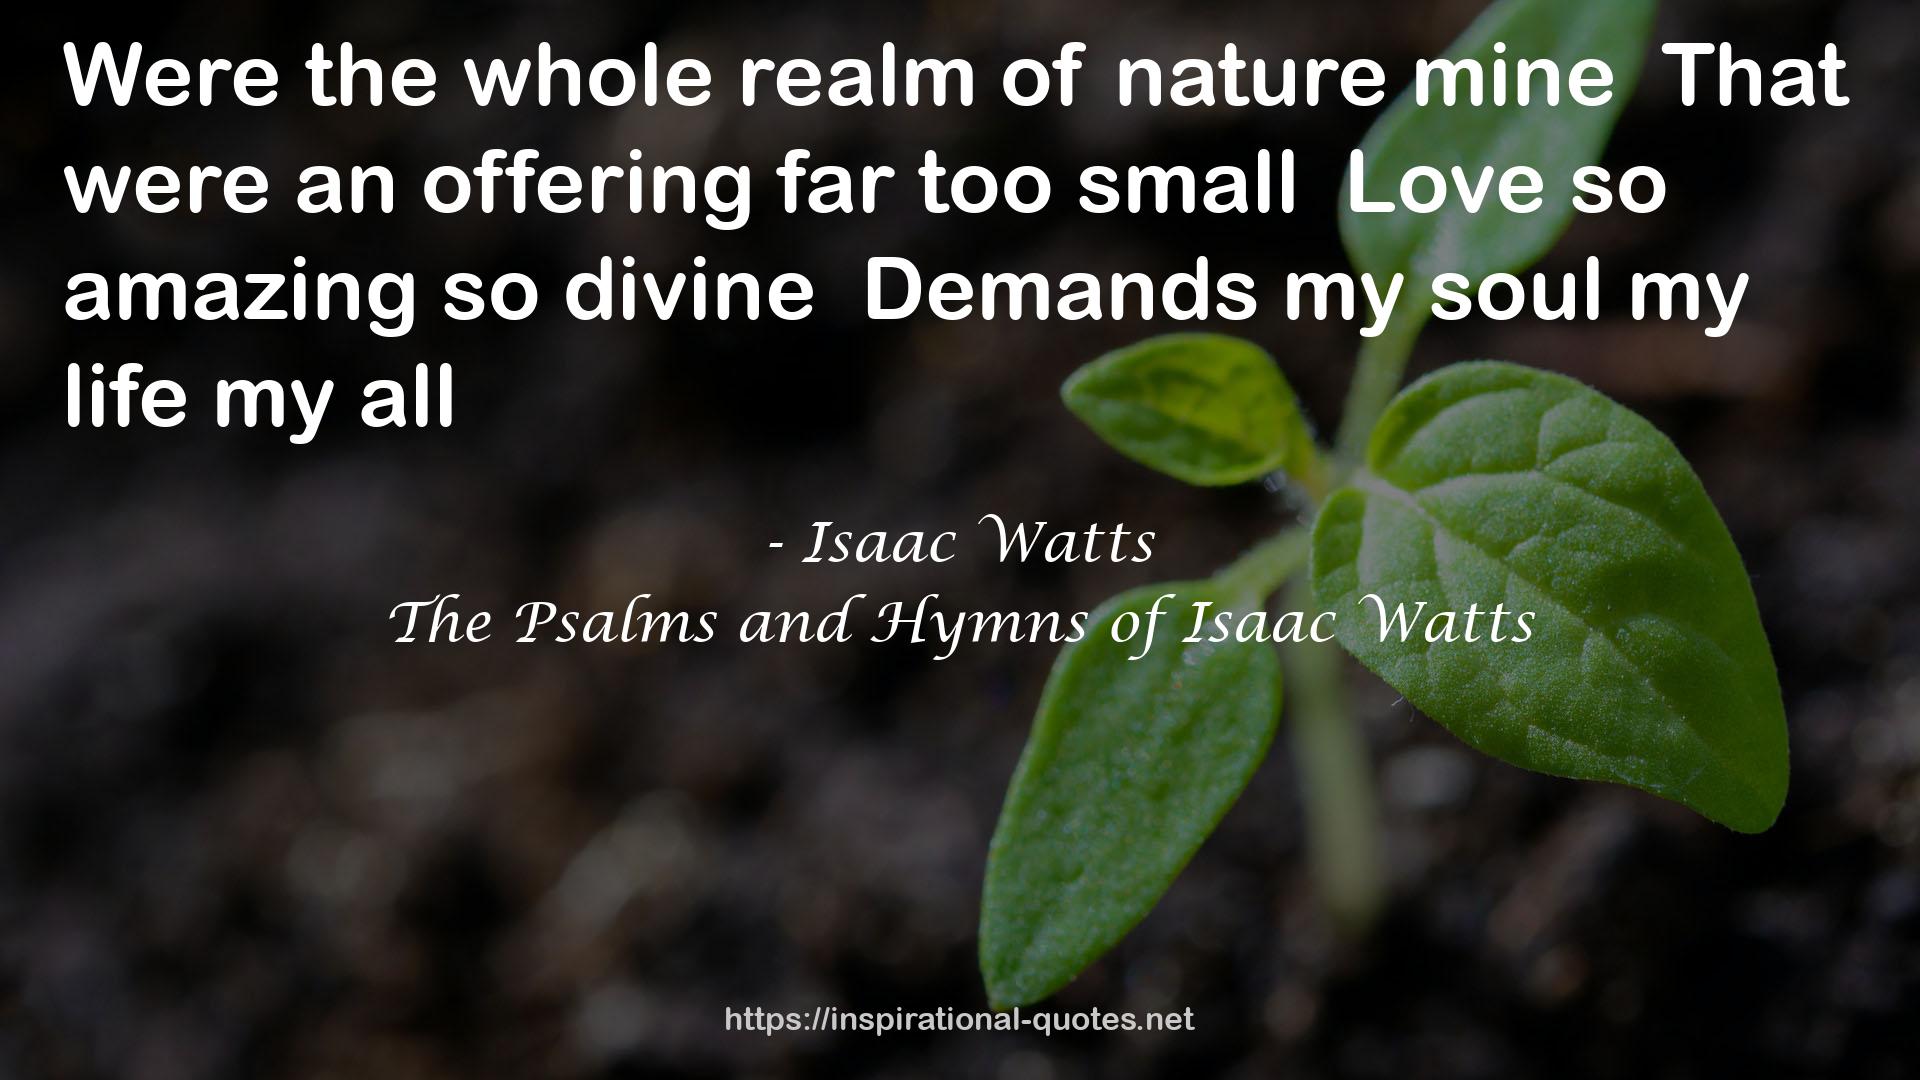 The Psalms and Hymns of Isaac Watts QUOTES